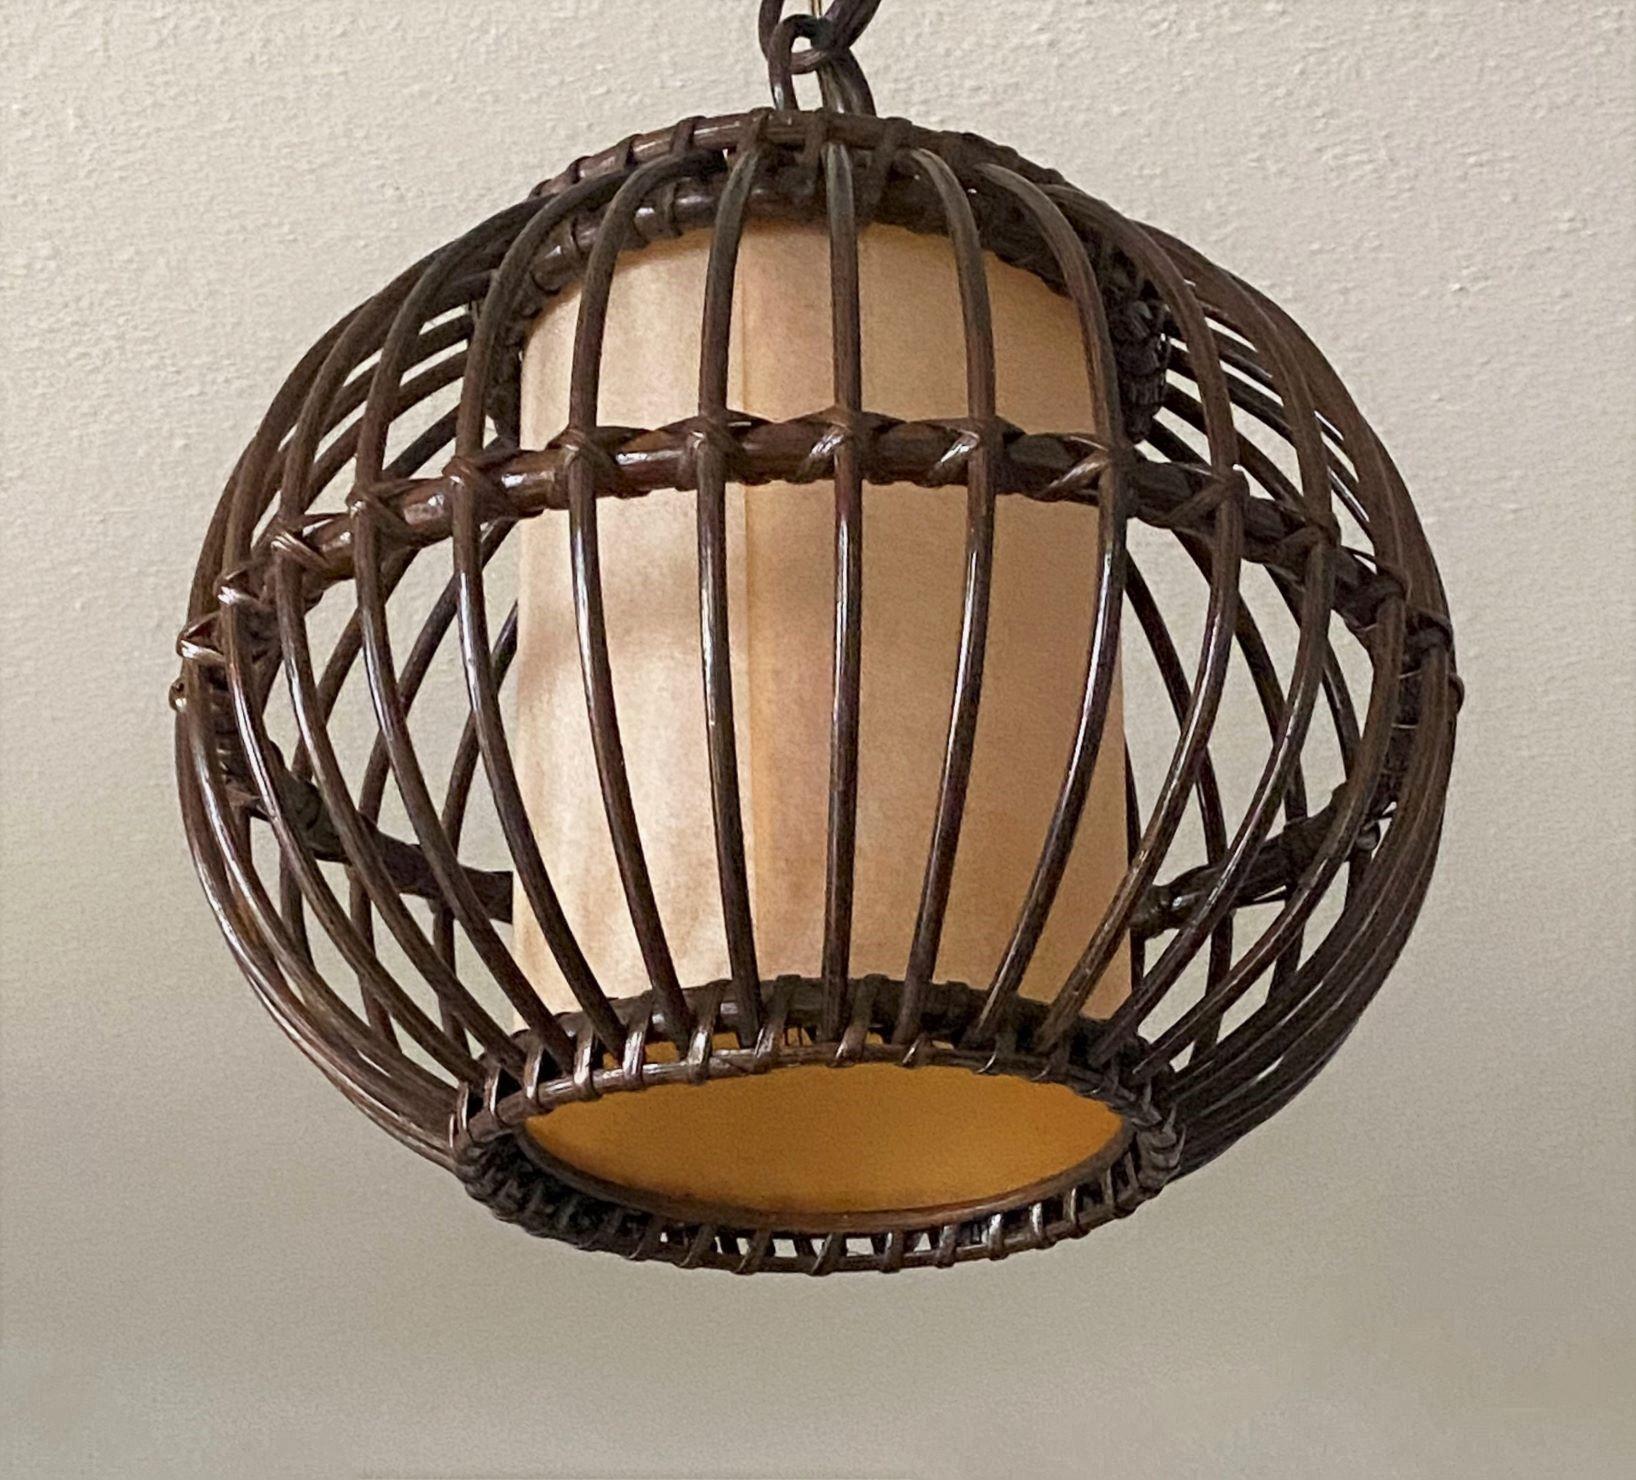 Hand-Crafted Louis Sognot Bamboo Rattan Pendant Lantern with Perchment Shade, France, 1950s For Sale